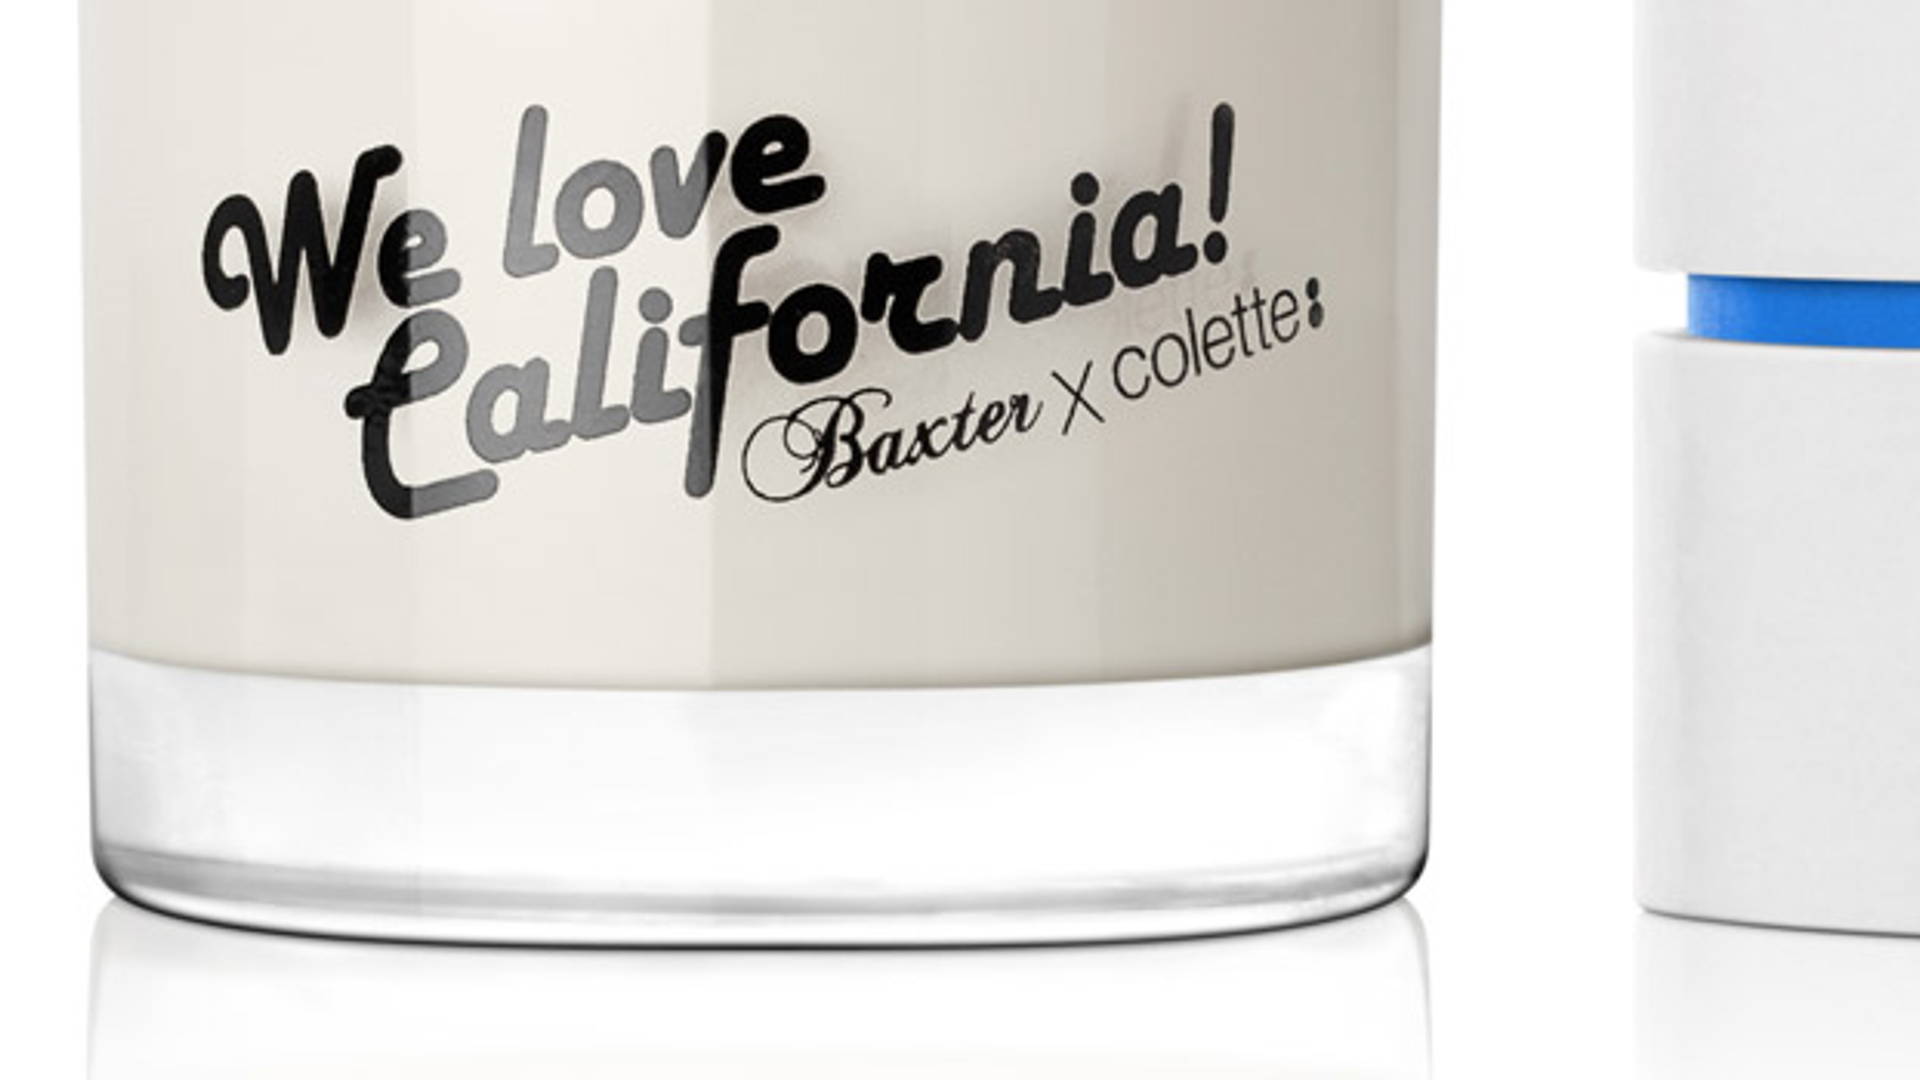 Featured image for Baxter X Colette: We Love California!